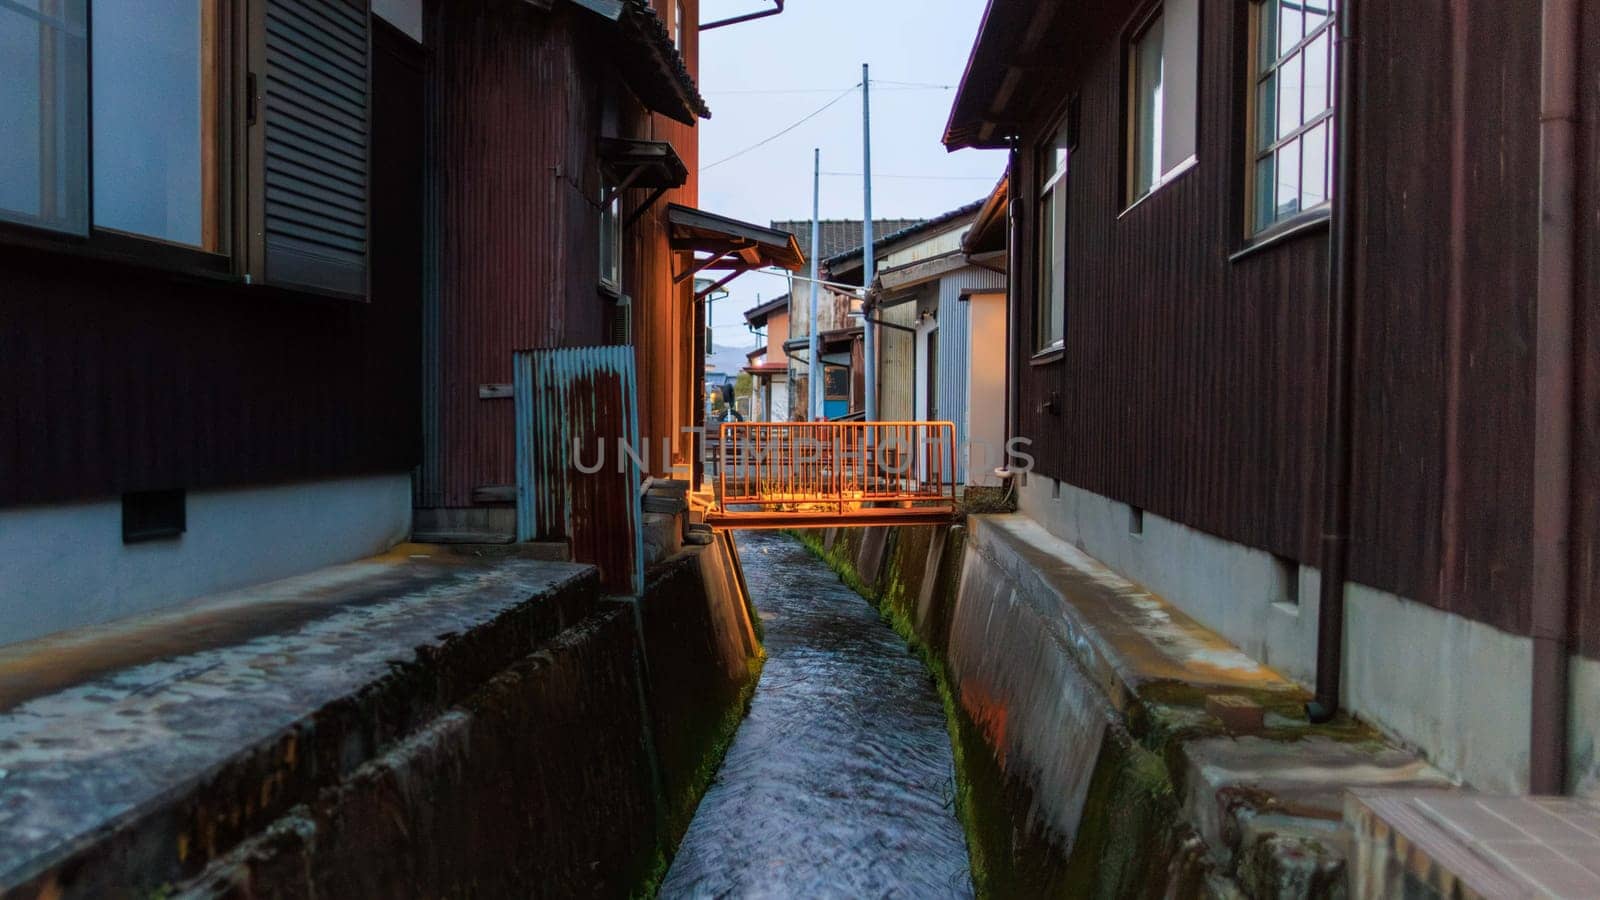 Footbridge over canal between traditional Japanese houses at dusk in Takeda, Japan by Osaze